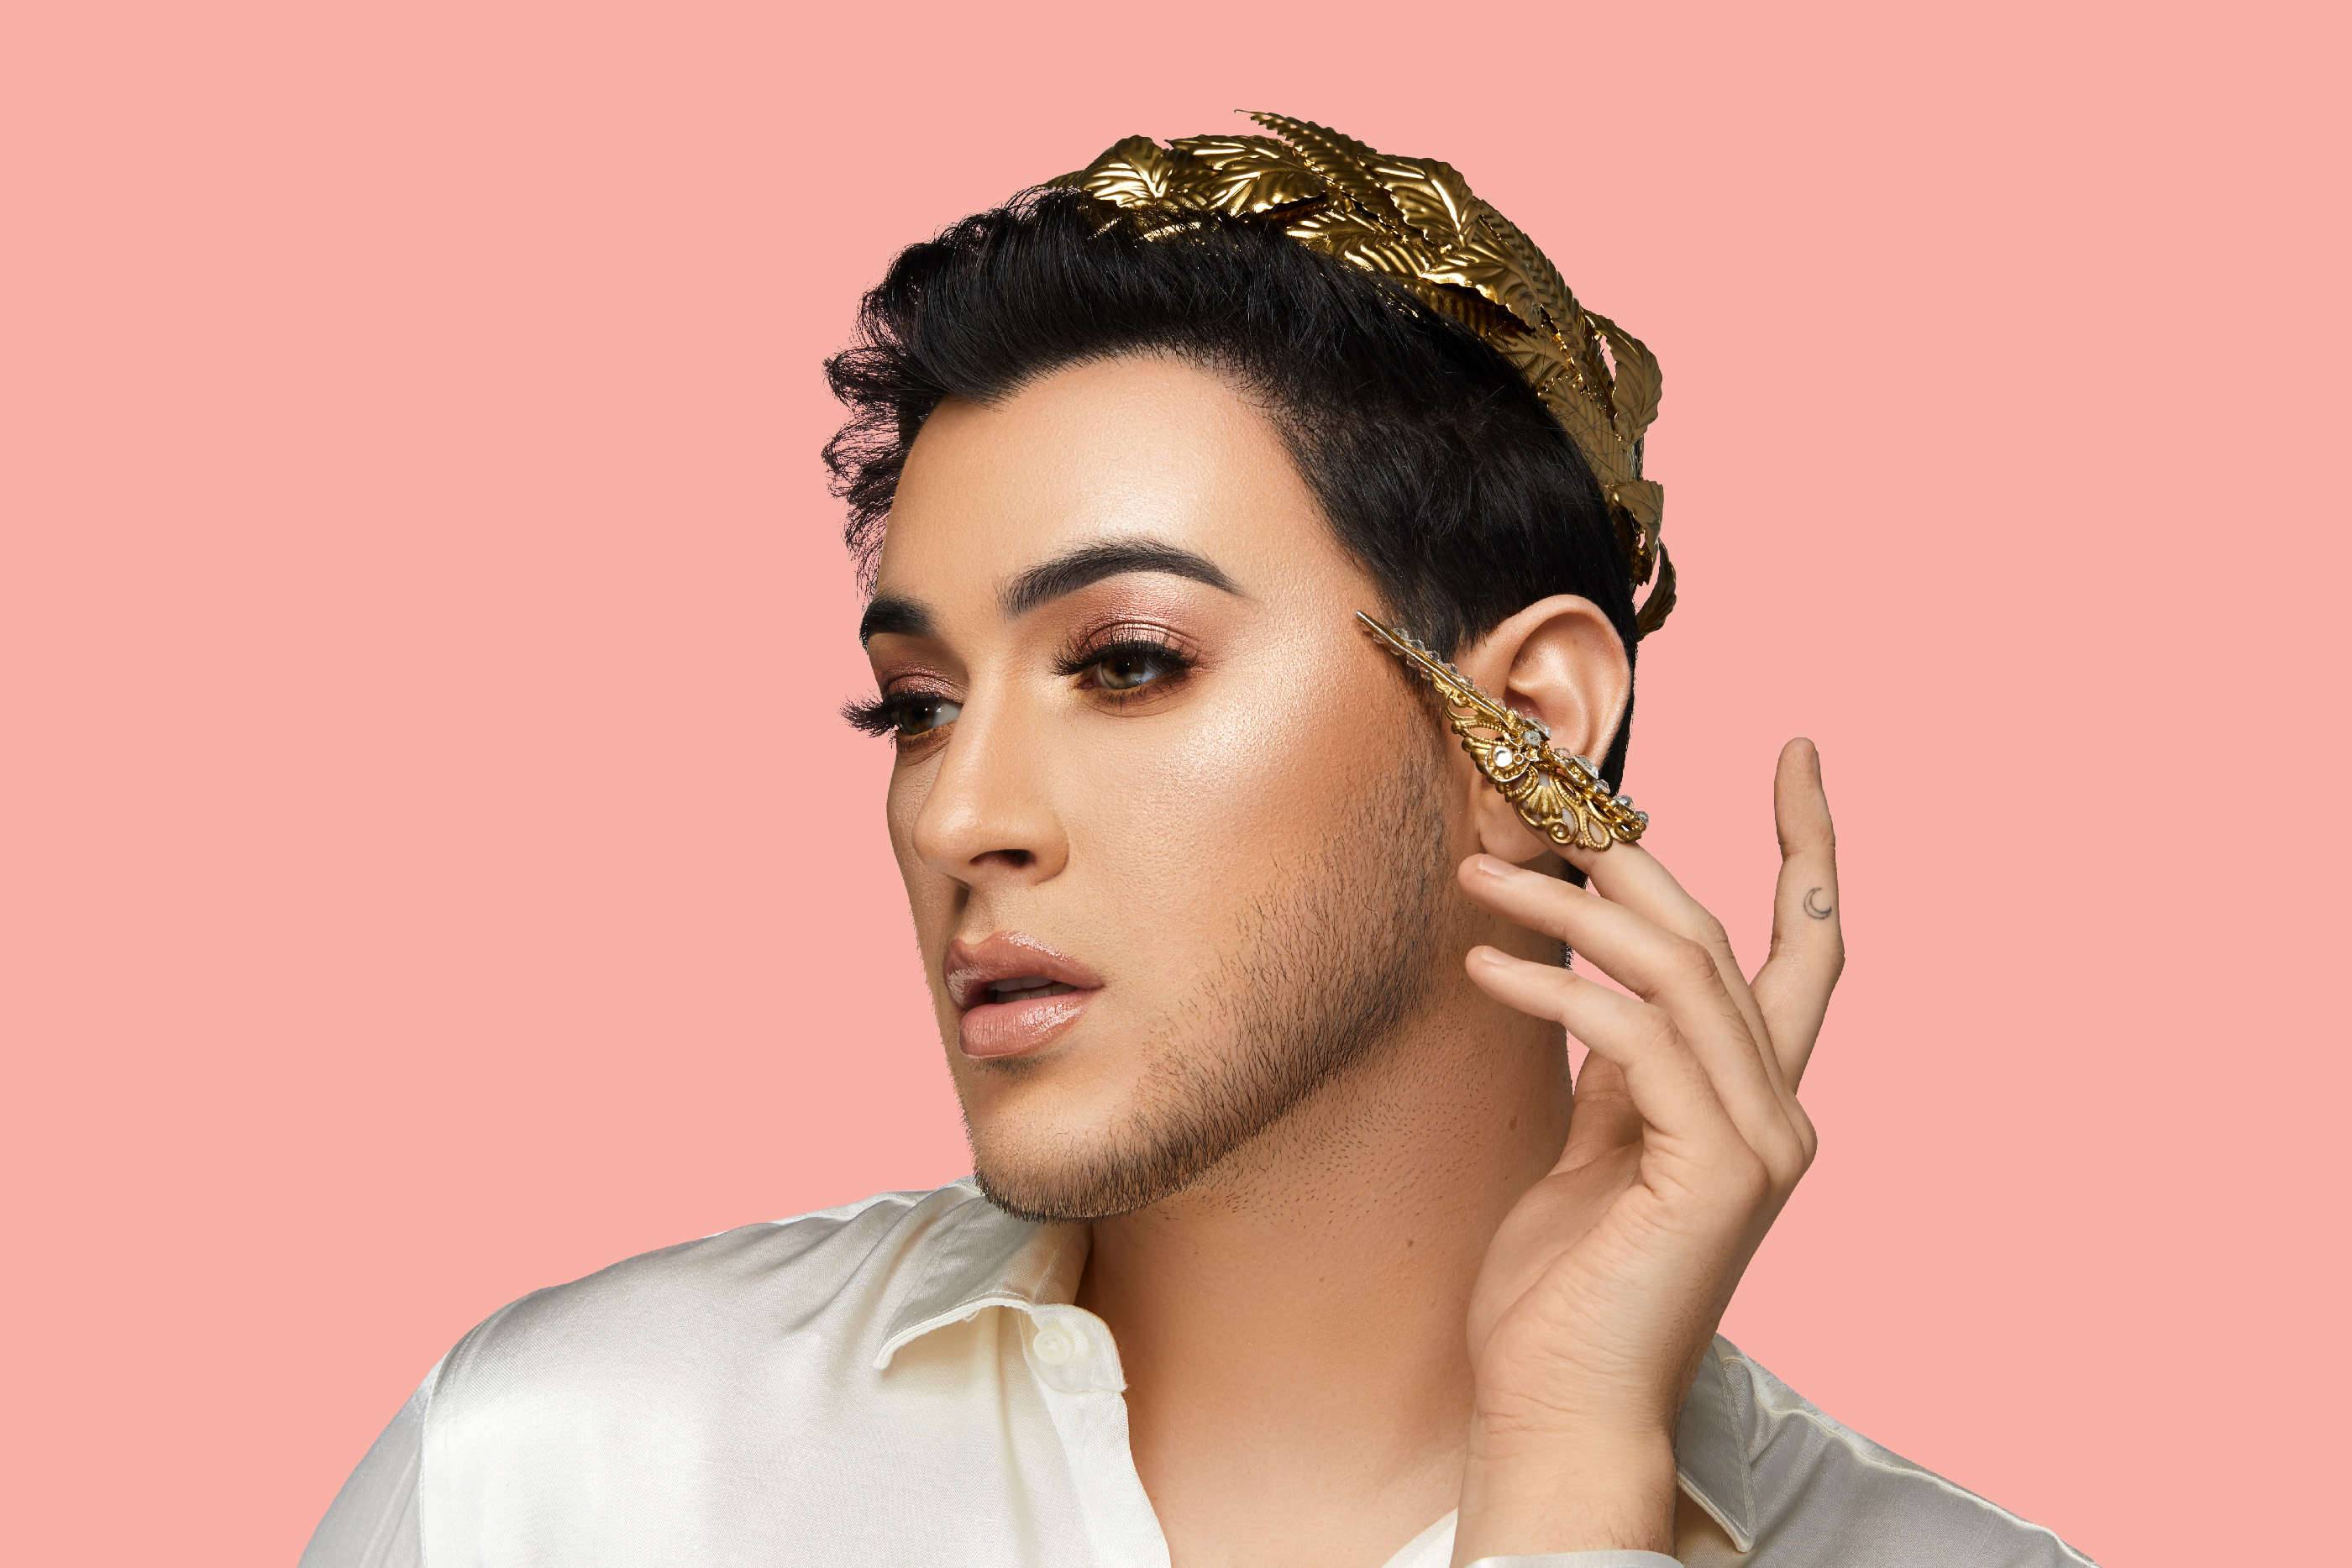 How Manny MUA, a 27-Year-Old Beauty Influencer, Built His Makeup Empire